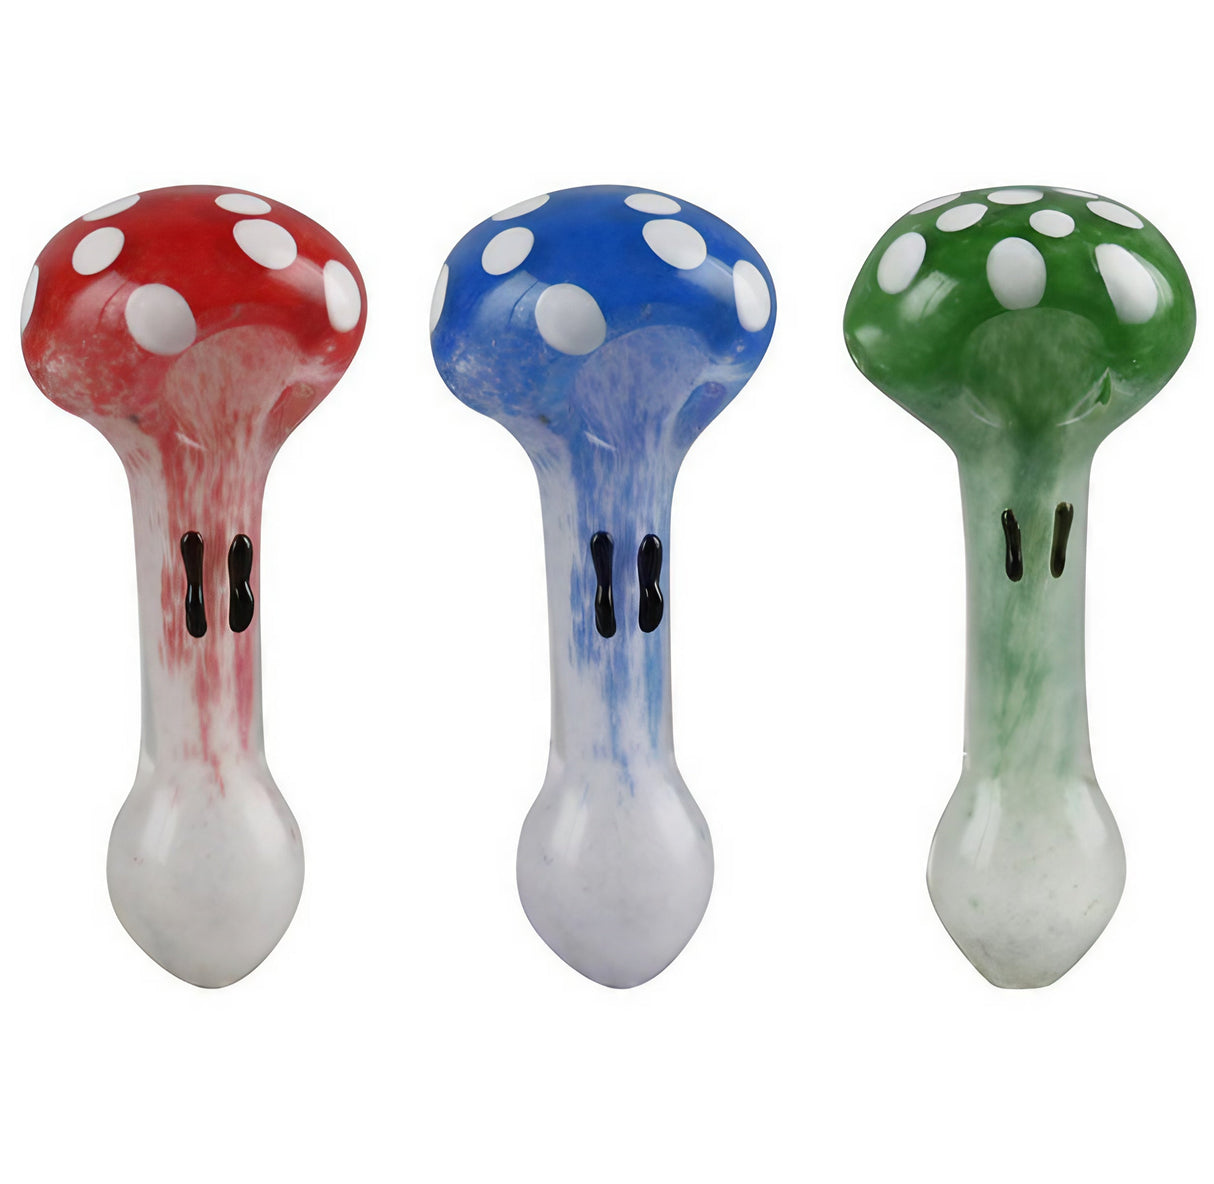 Happy Mushroom Spoon Pipes in red, blue, and green, compact 4.2" borosilicate glass, front view